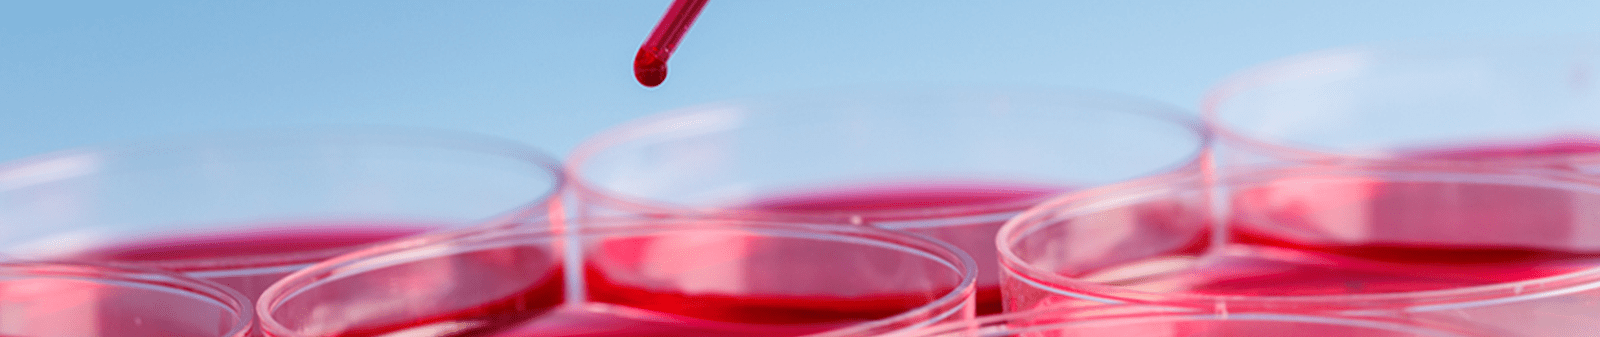 Center for Blood Disorders generic header image with blood droplet